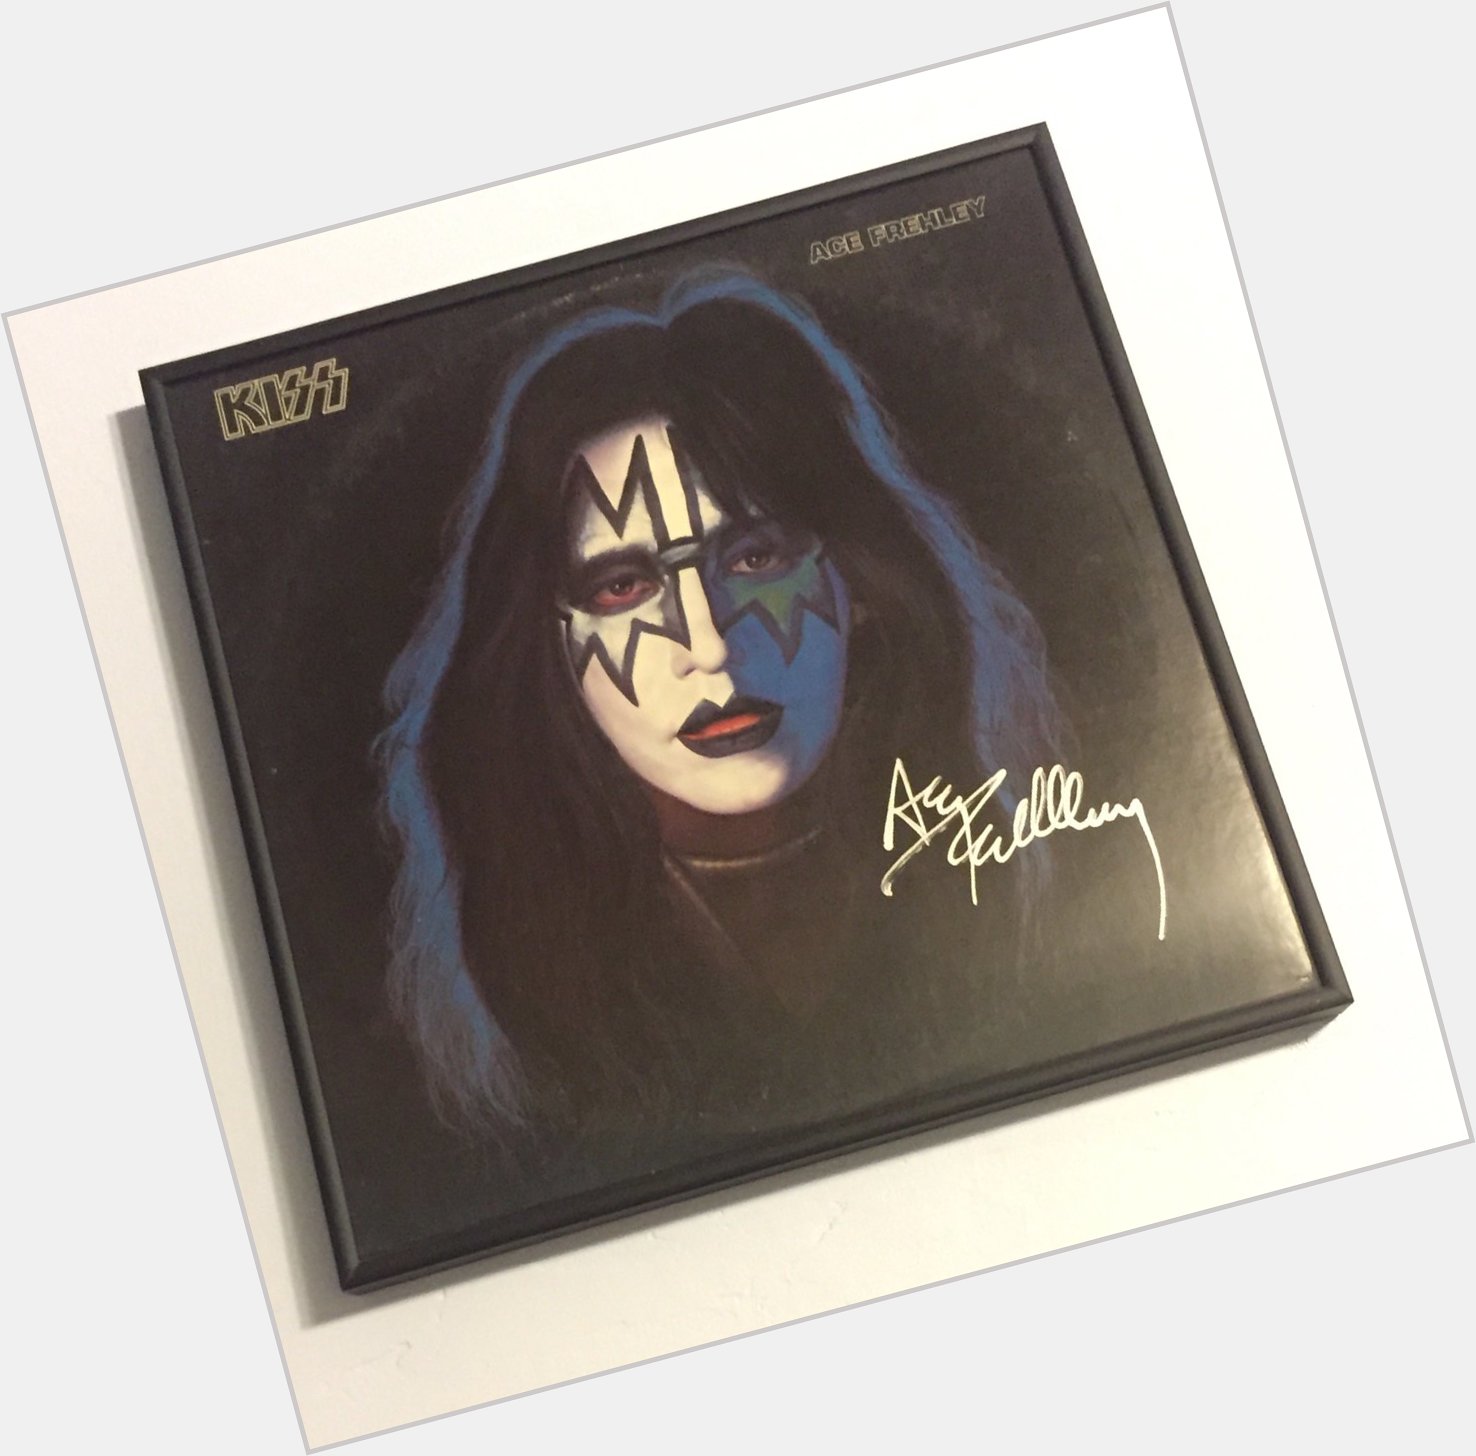 Happy belated Birthday to the Legend Ace Frehley, the special sauce that makes KISS go from good to great. 